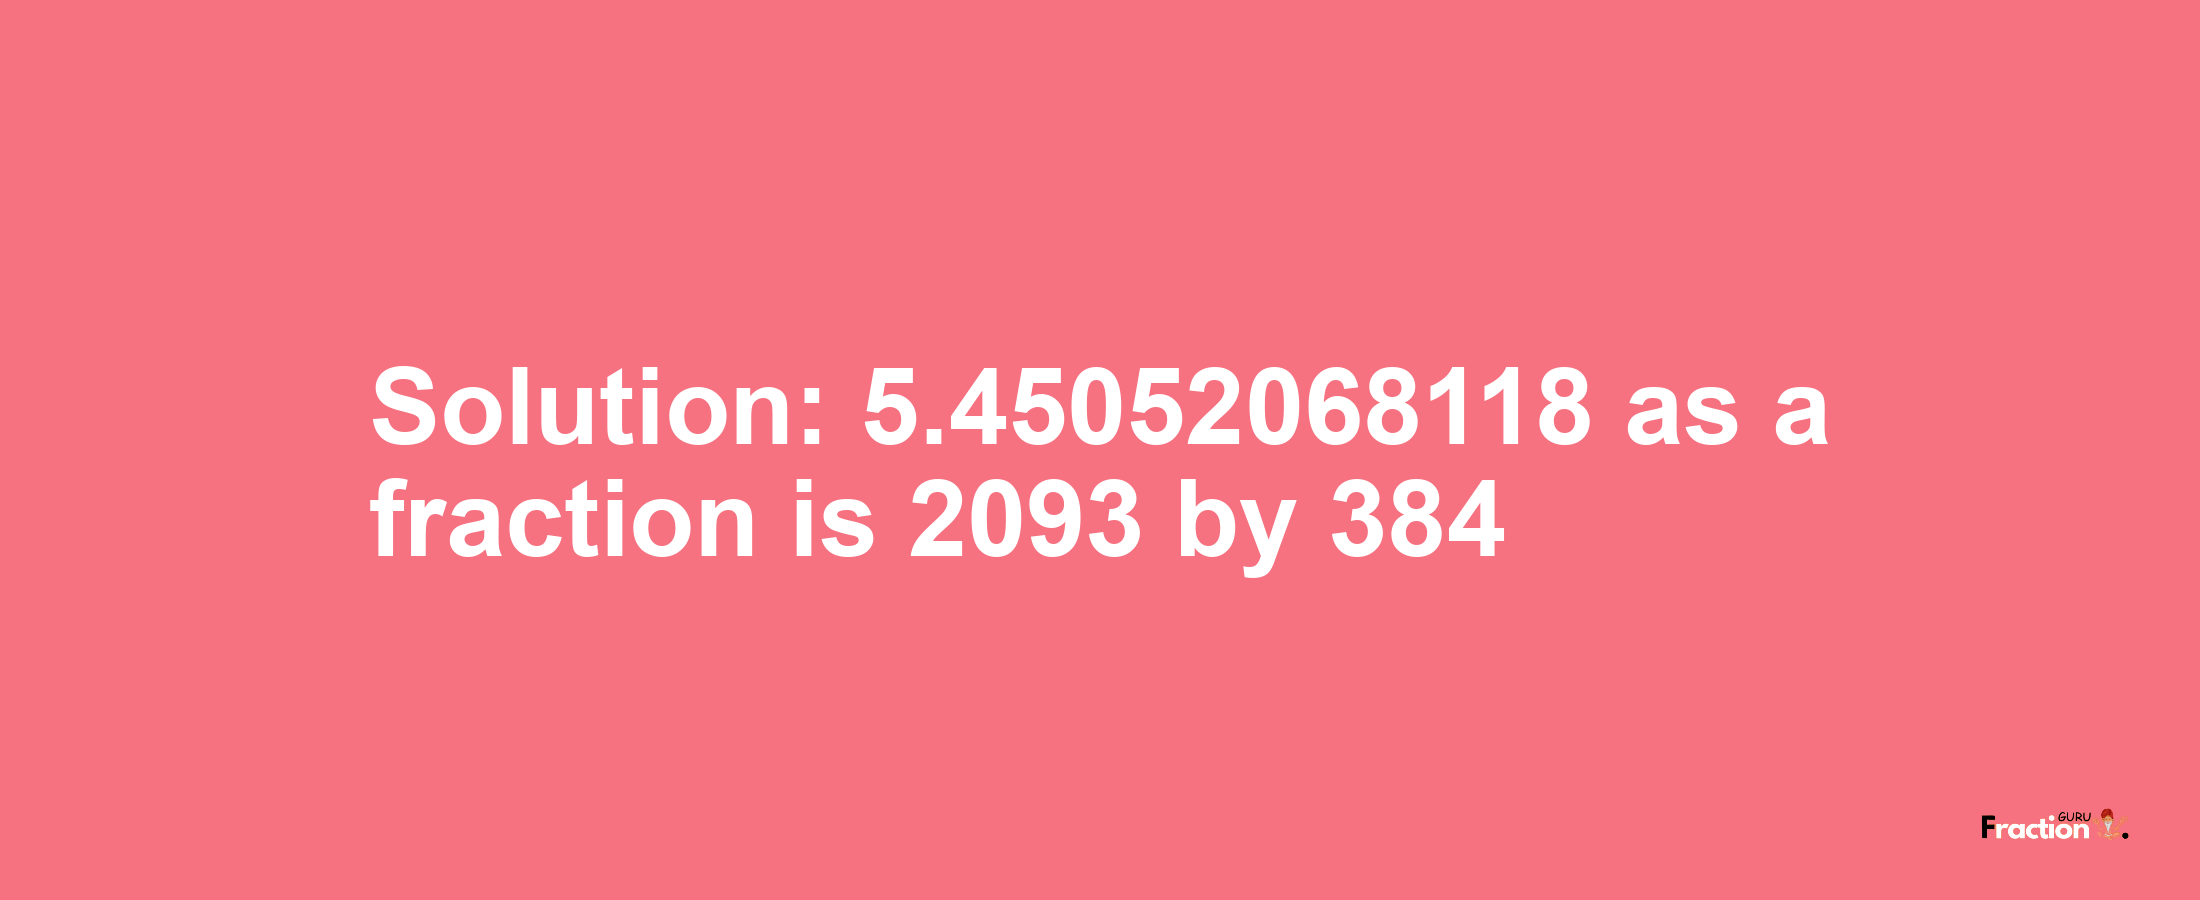 Solution:5.45052068118 as a fraction is 2093/384